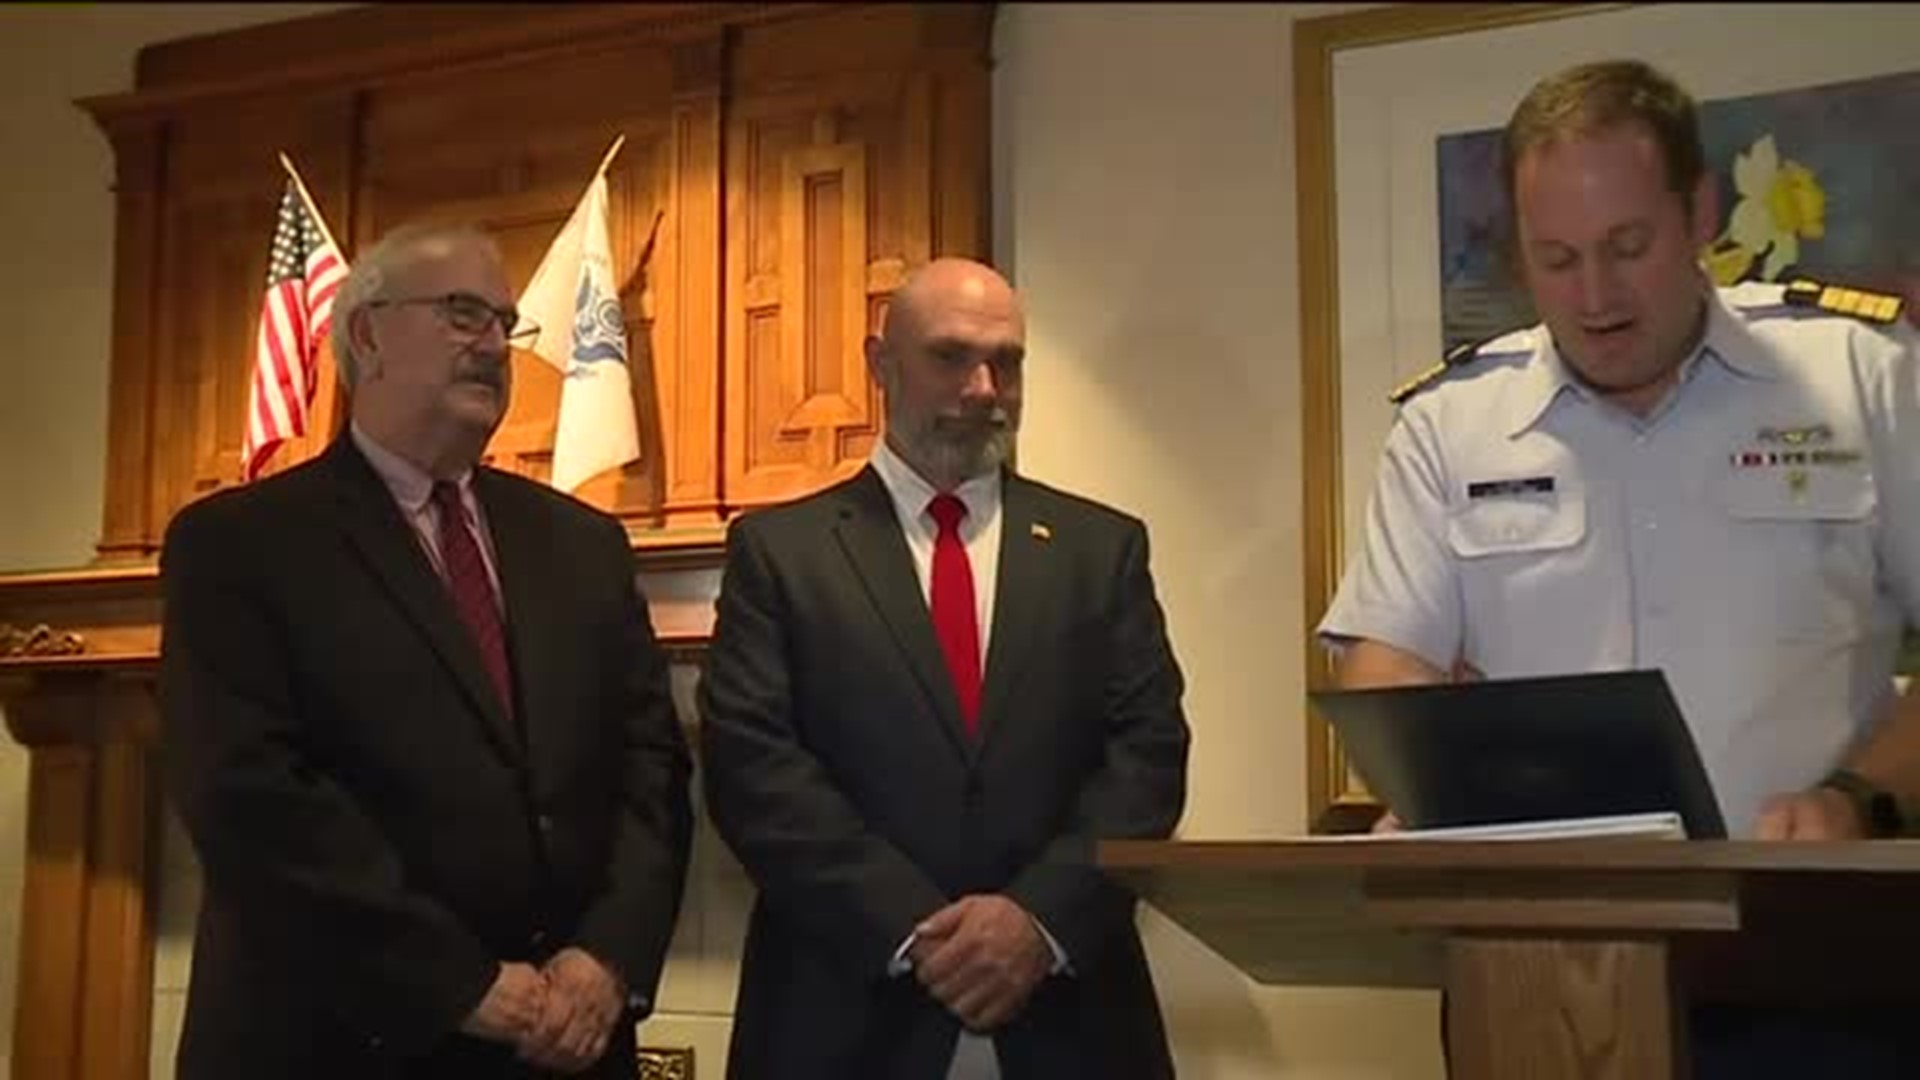 Two Men Honored by Coast Guard for Saving Friend's Life